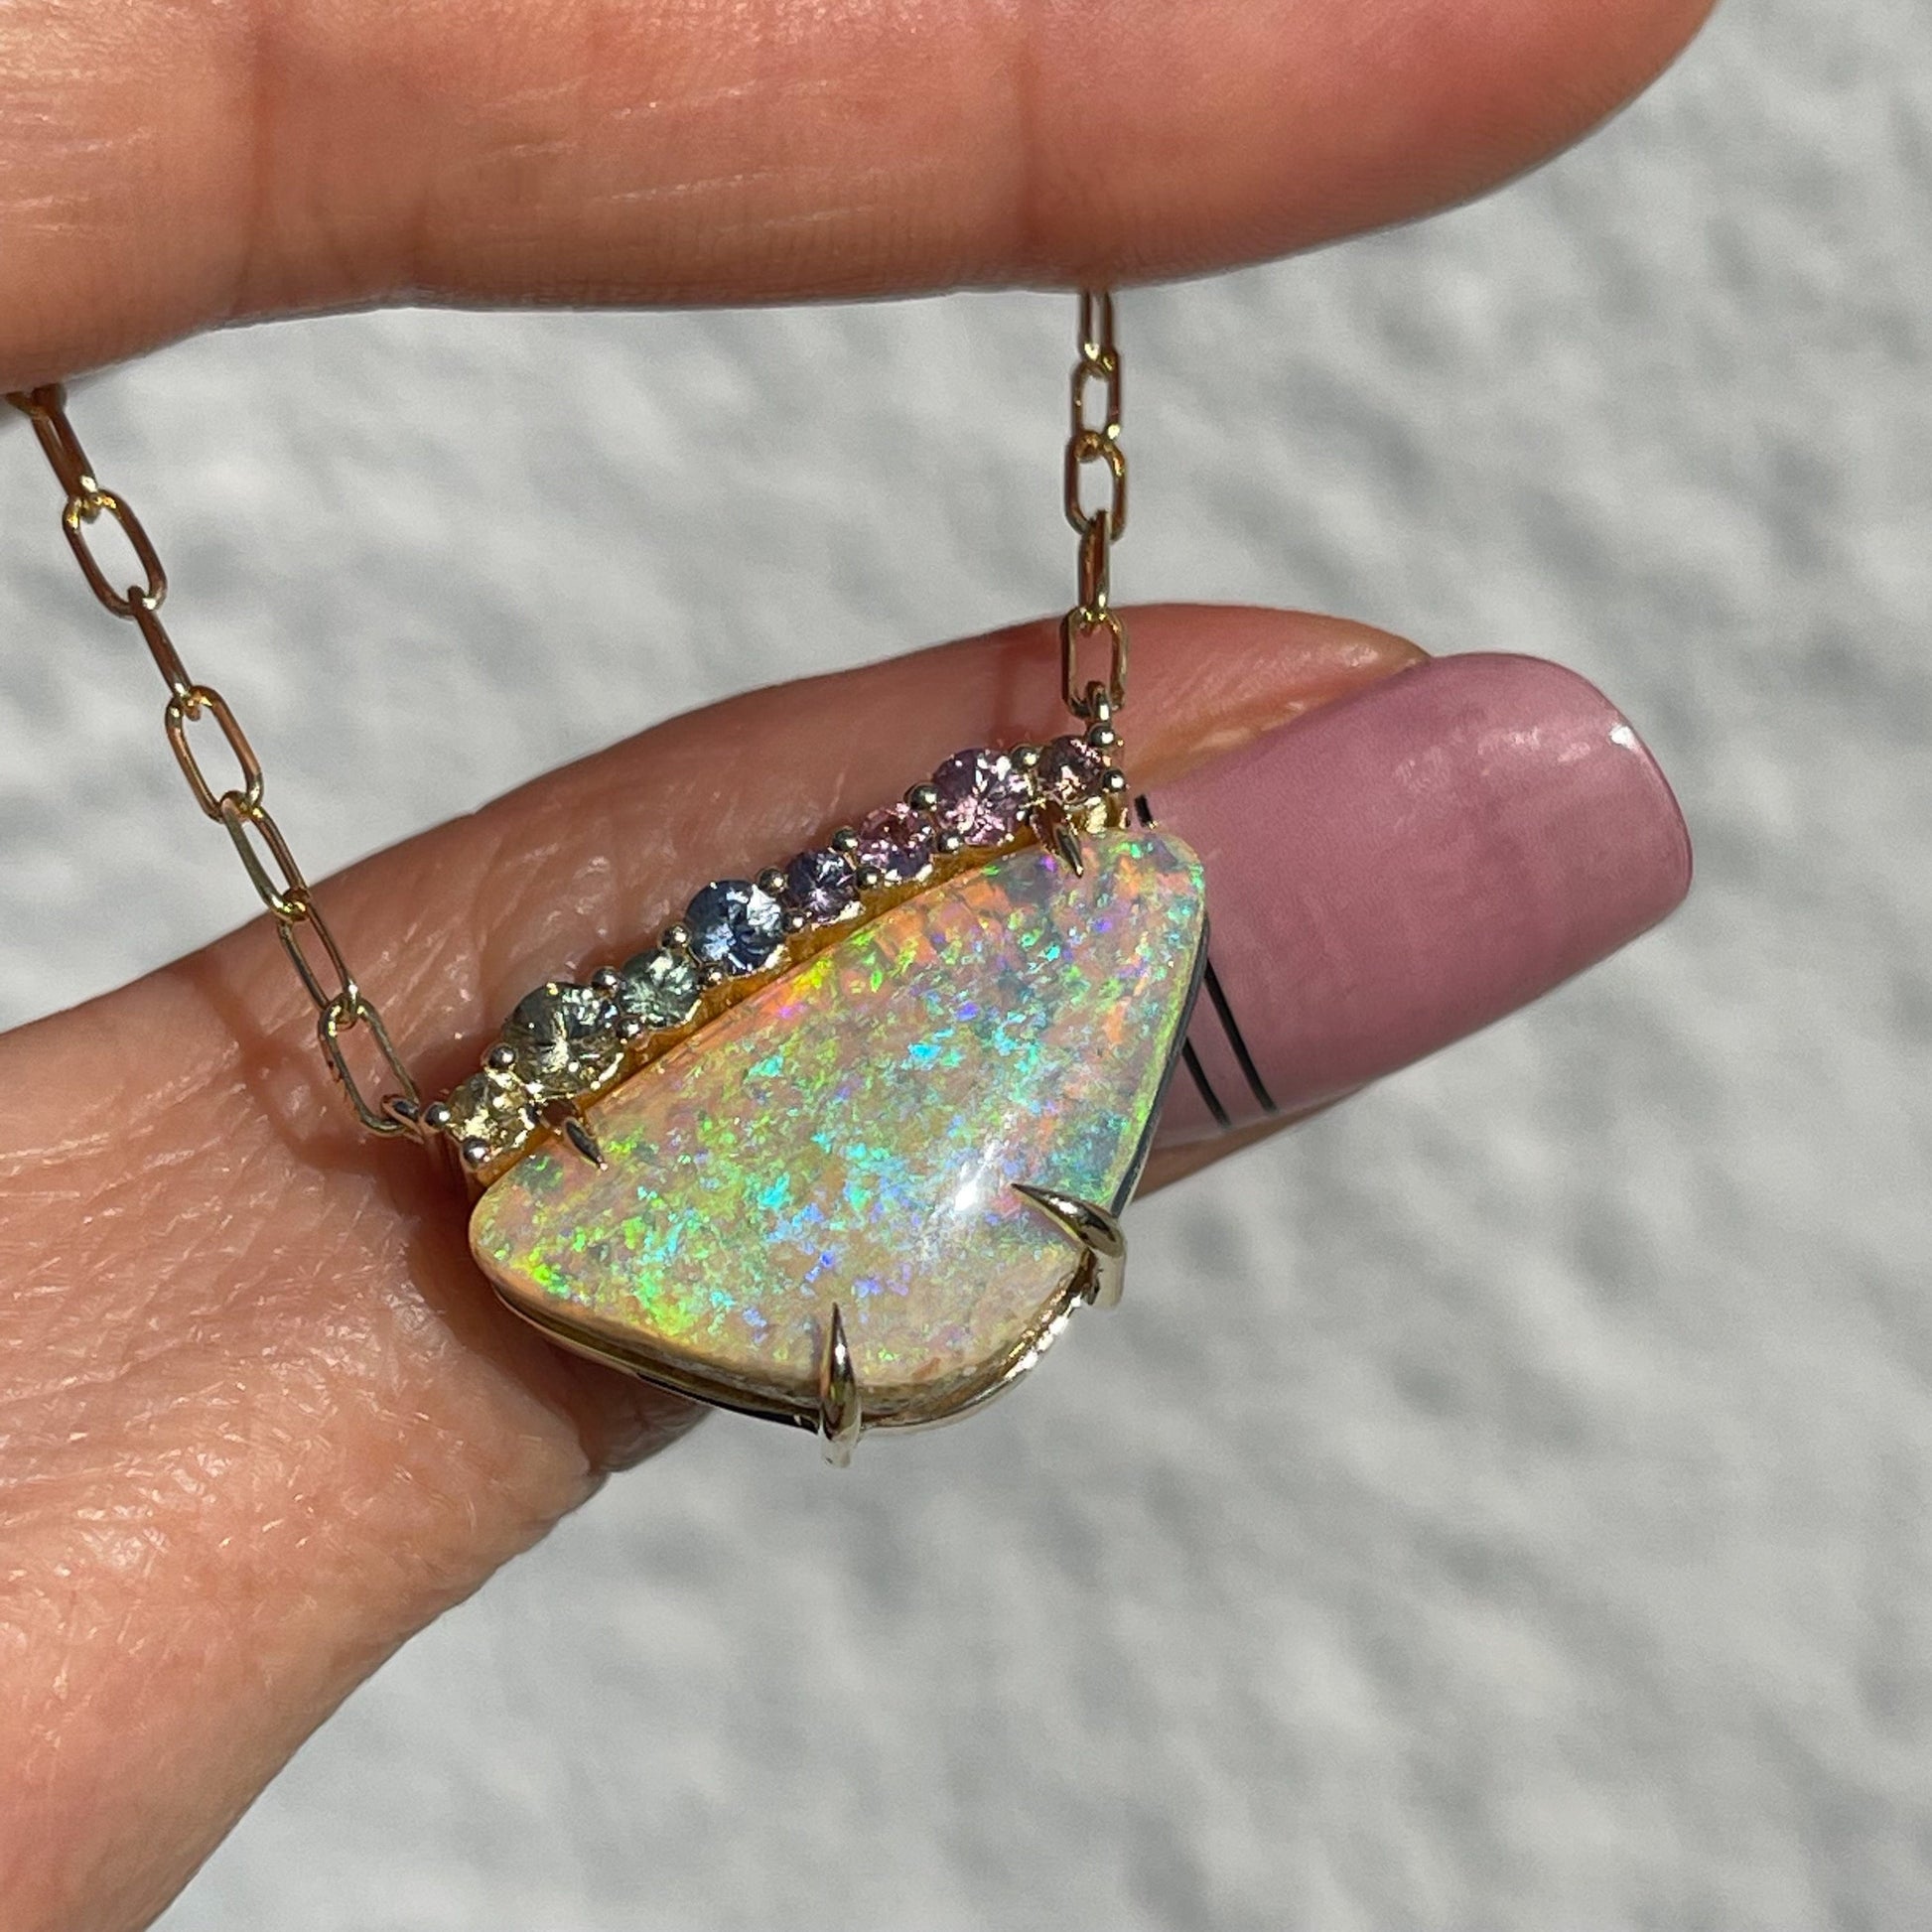 An Australian Opal Necklace by NIXIN Jewelry. The opal sapphire necklace is resting on a hand in the sunlight.